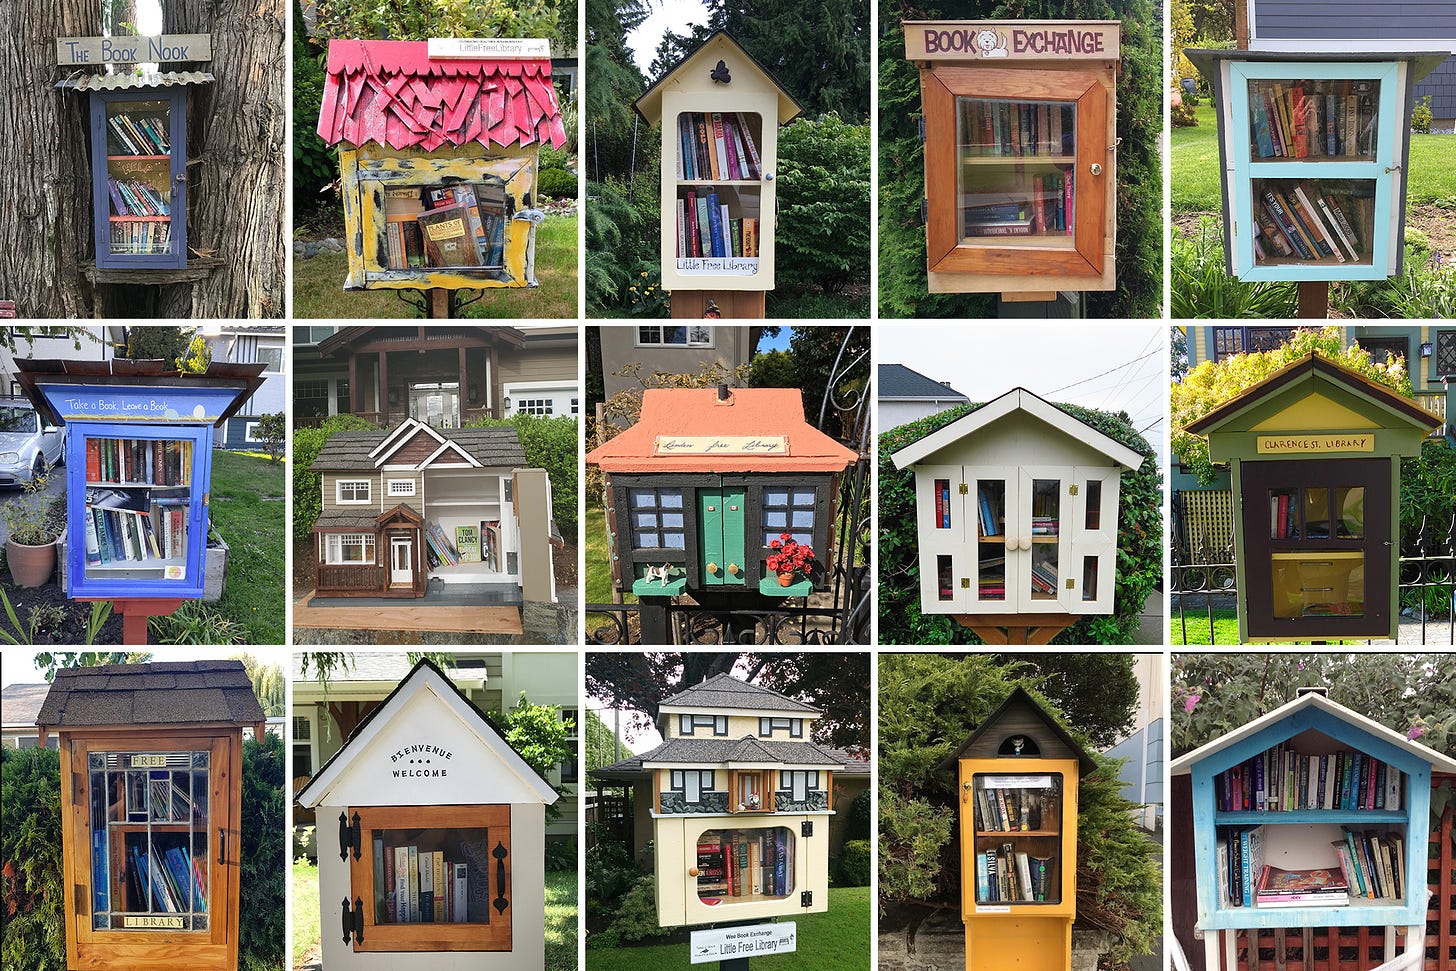 Canada's biggest community of little free libraries has only grown stronger  through COVID-19 - Capital Daily